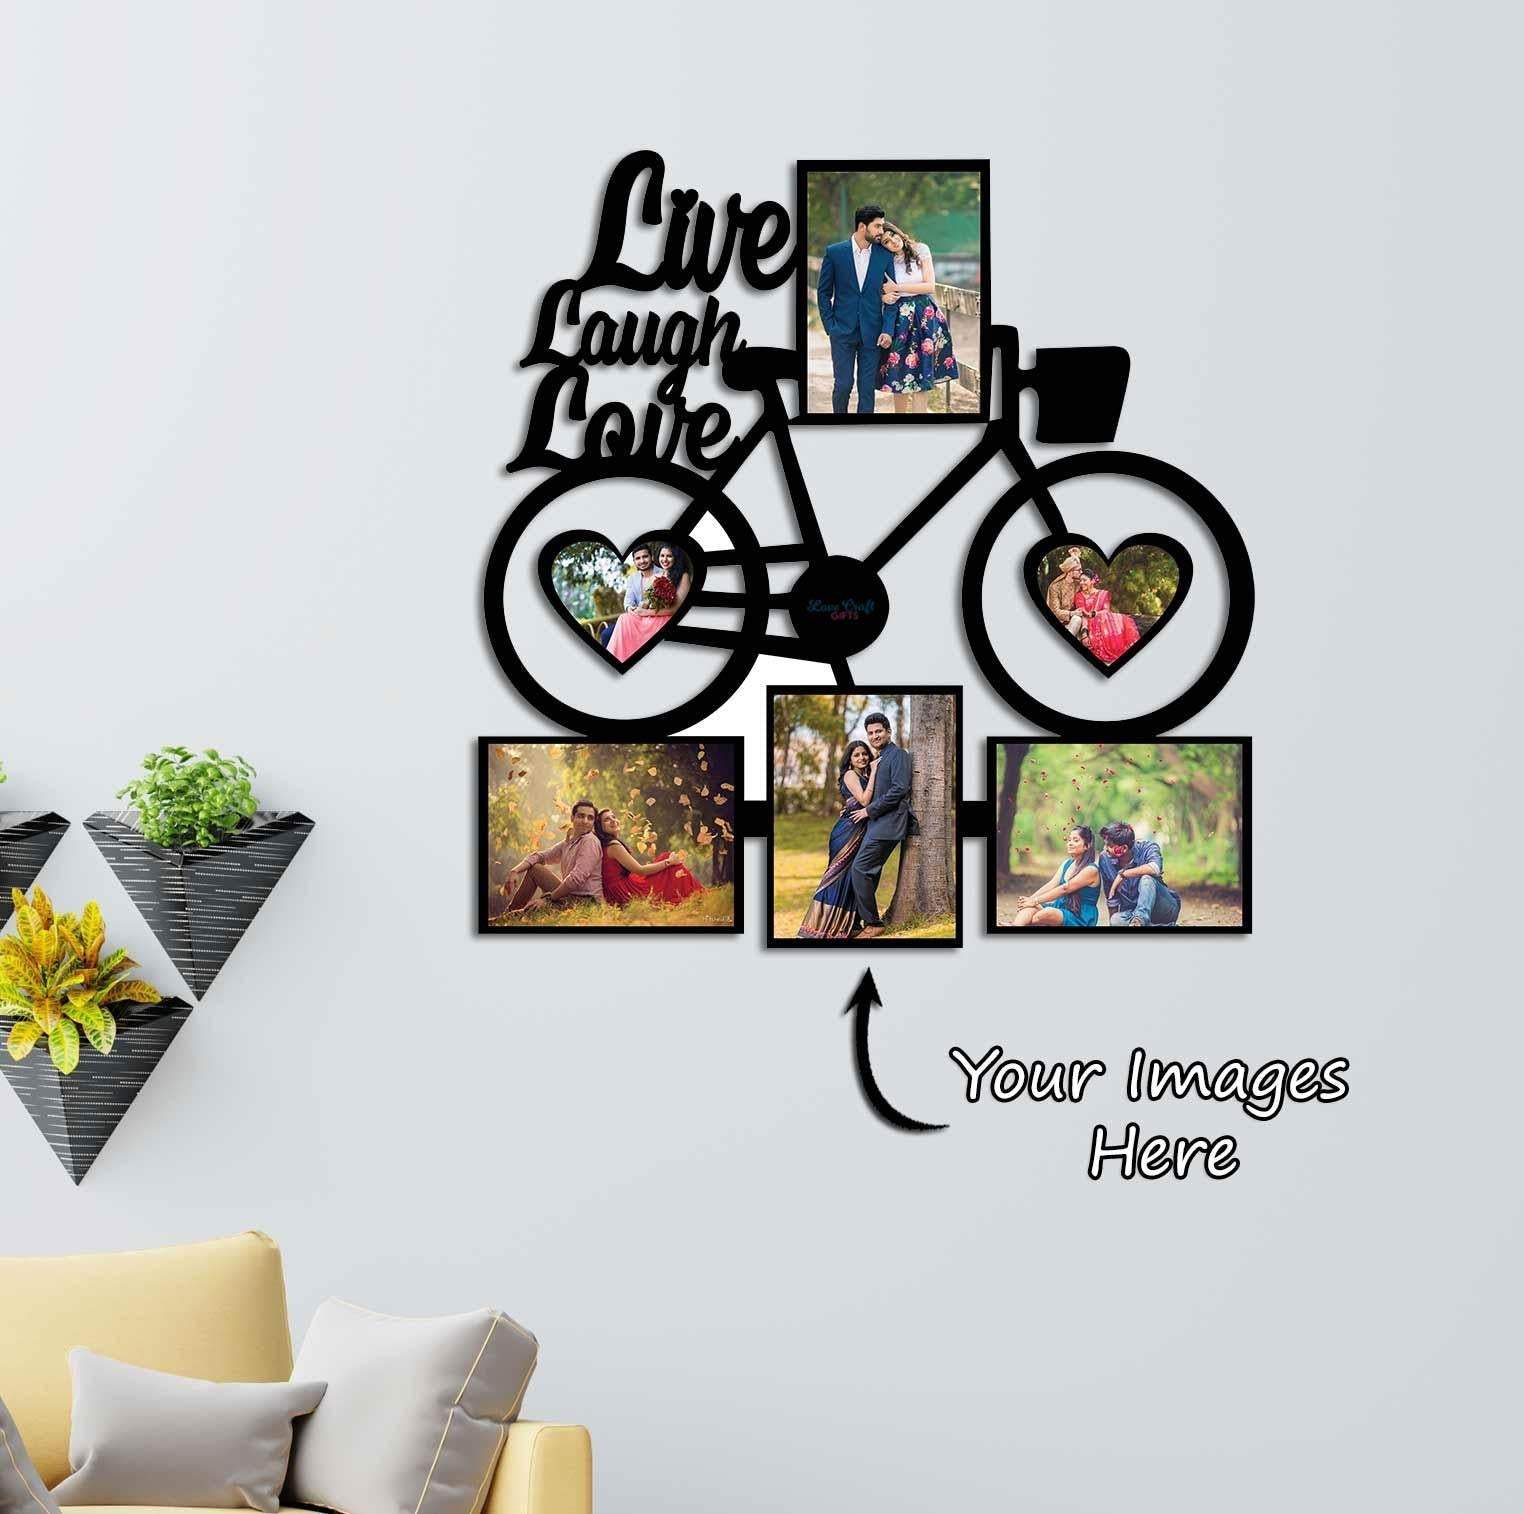 My Photo Print Customized Wooden Home Of Happiness Name Plate Corporate  Gifts/ Promotional Gifts at Rs 1299 | Delhi | ID: 22627374230